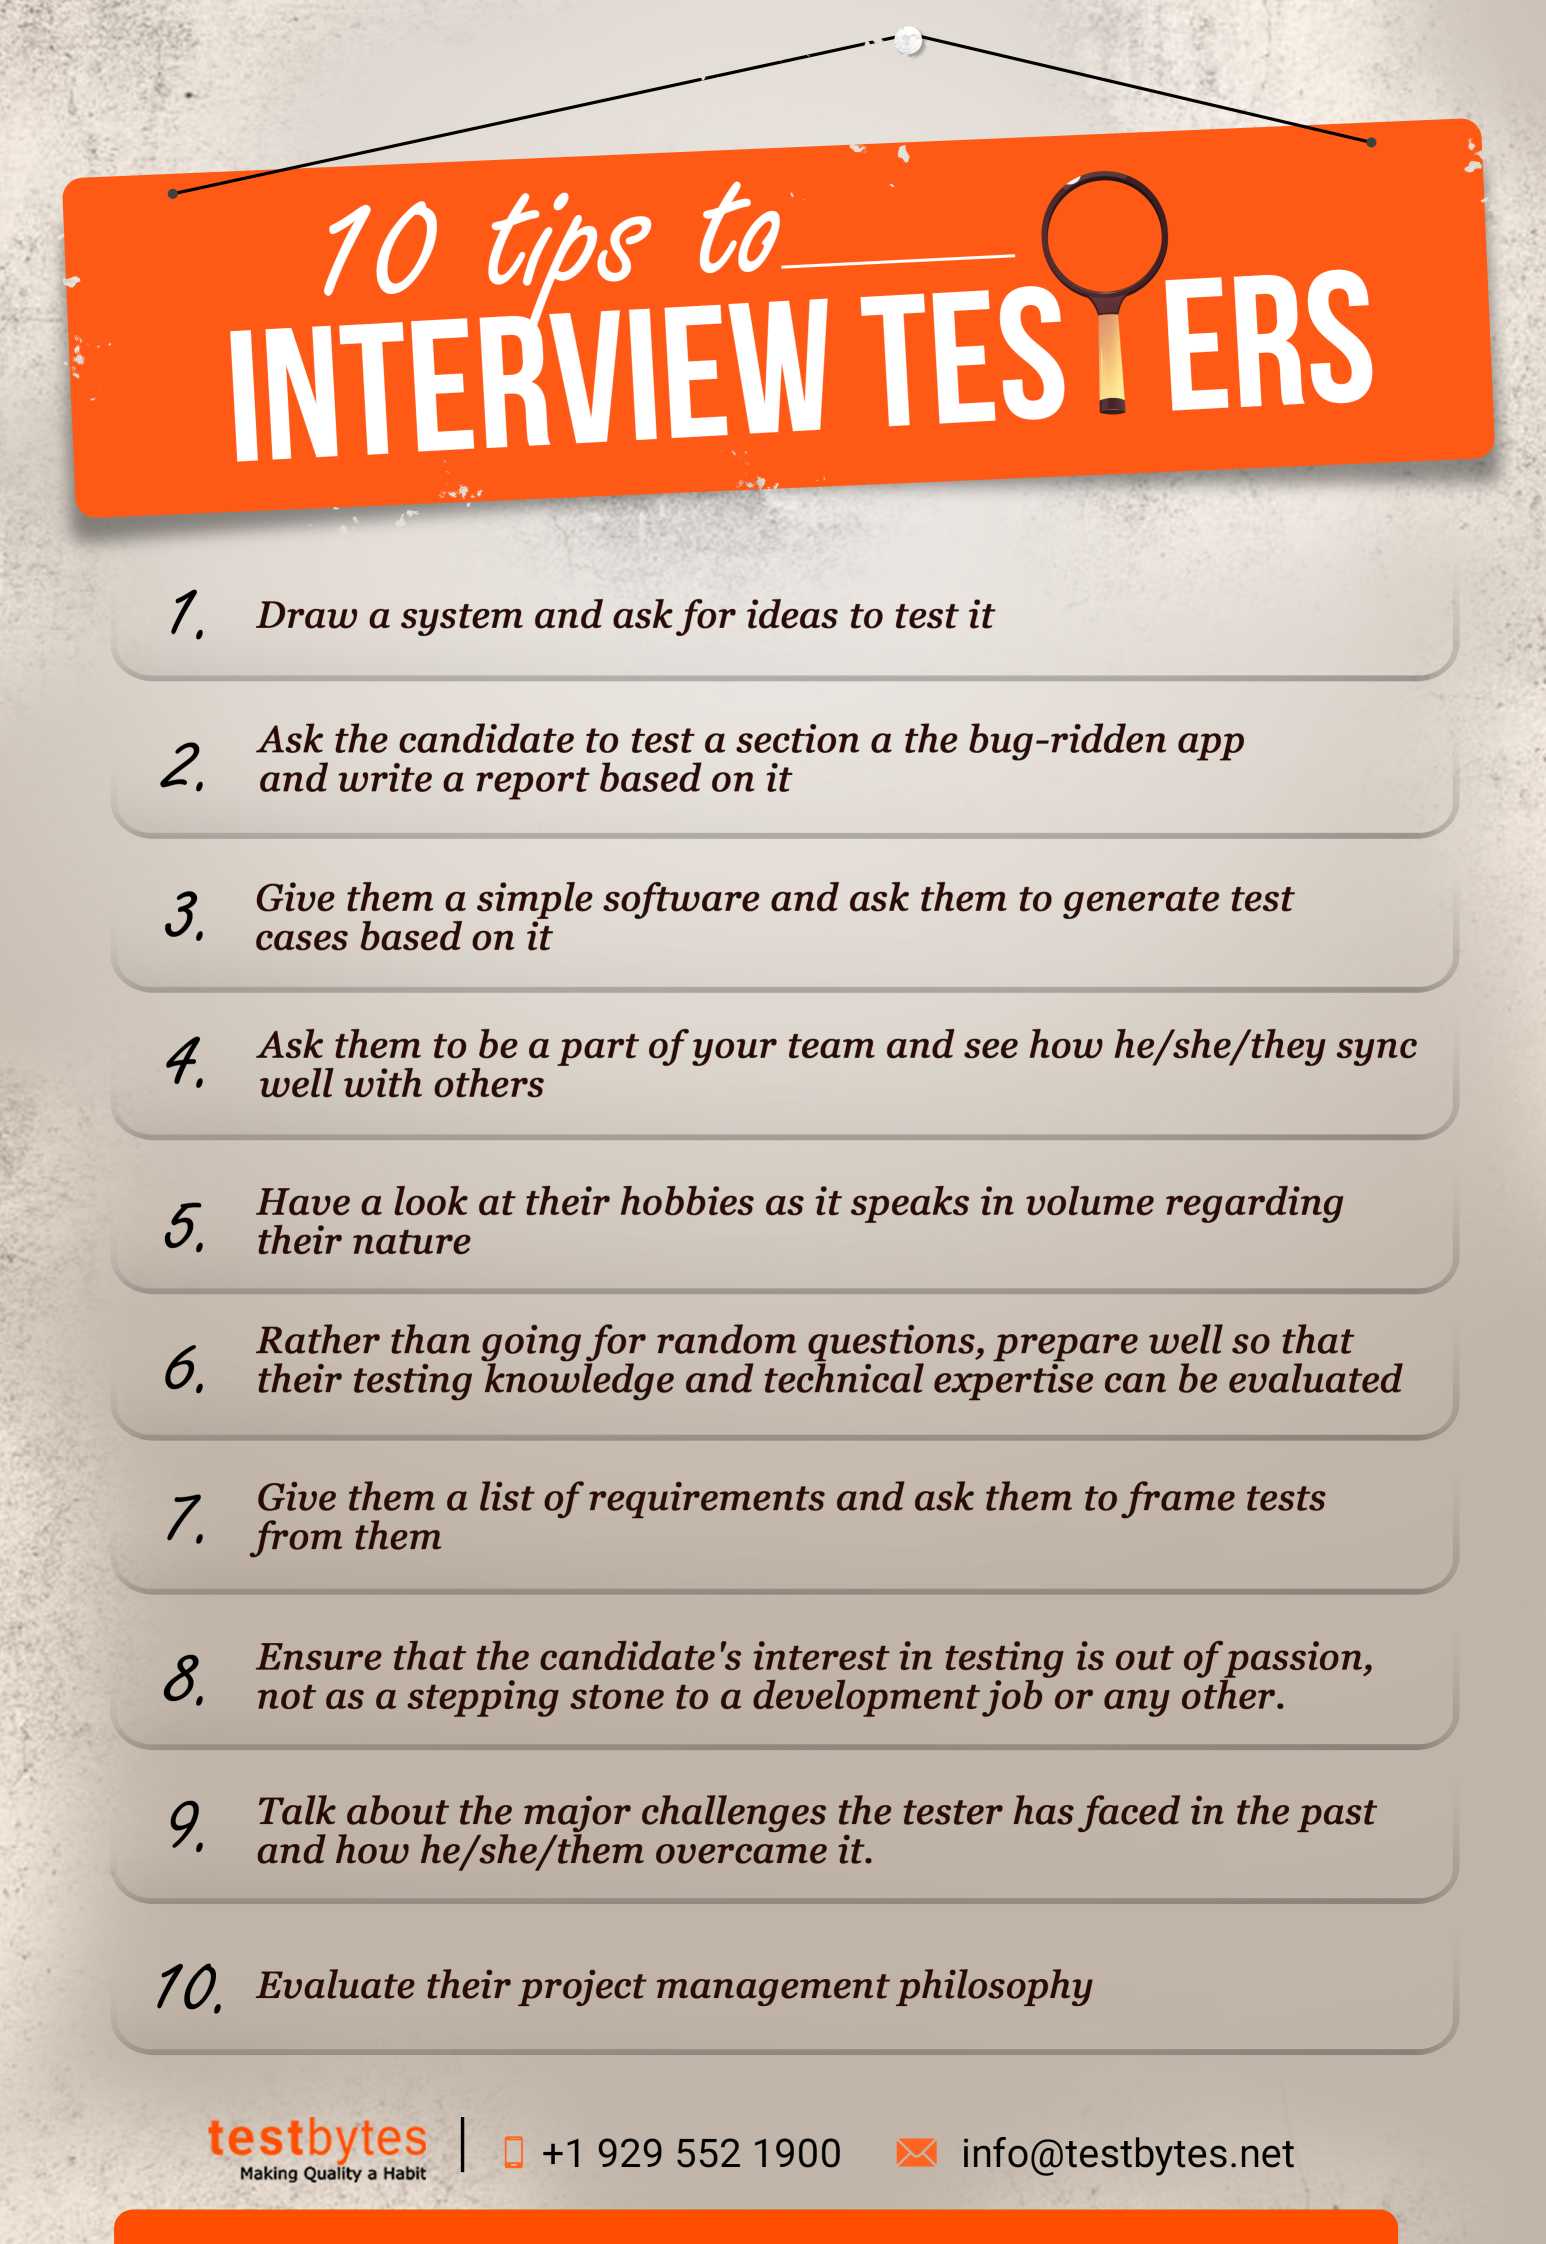 9 Tips For Interviewing Testers